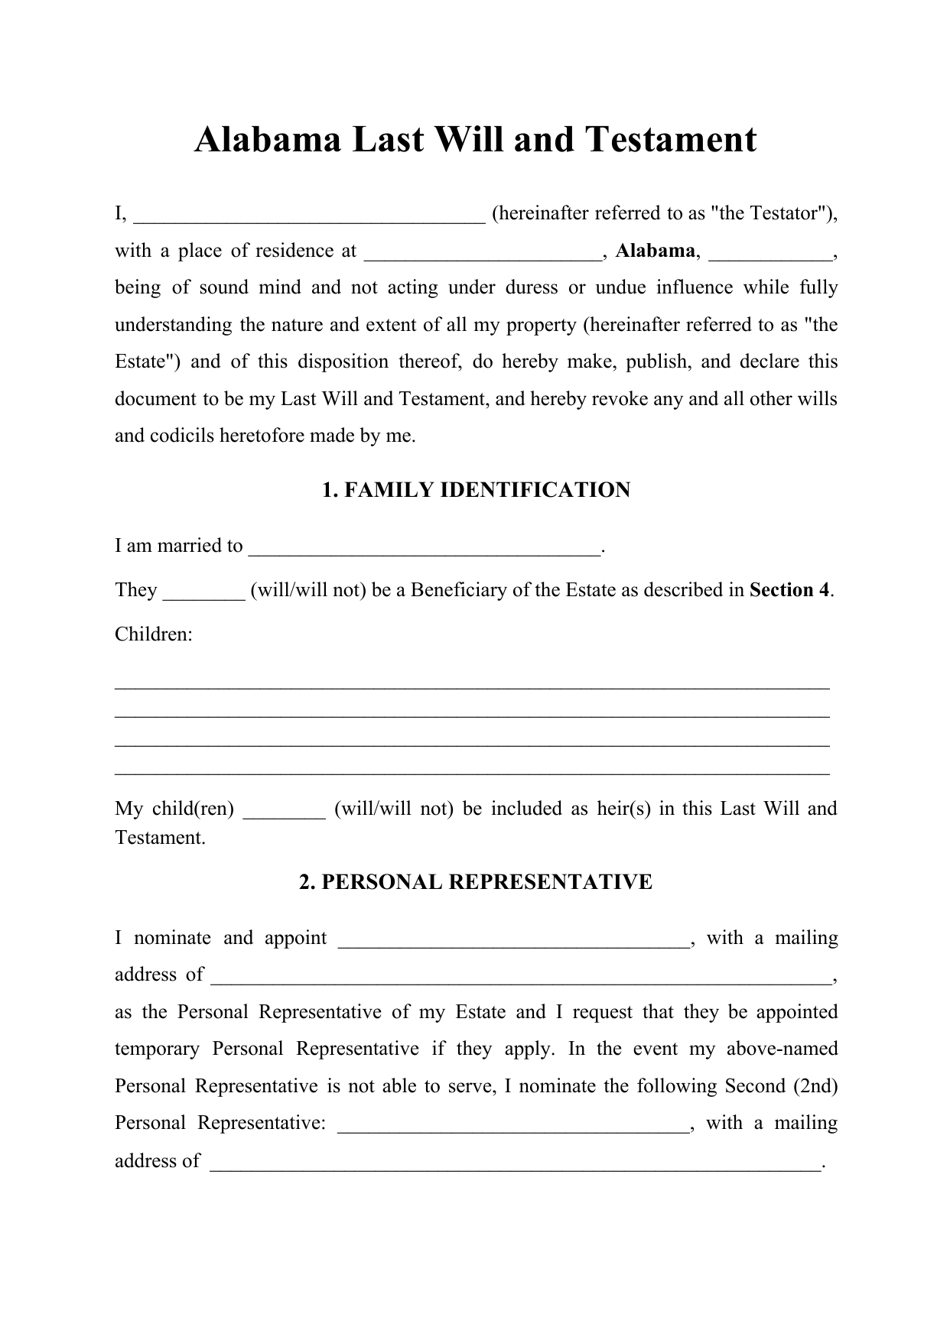 Last Will and Testament Template - Alabama